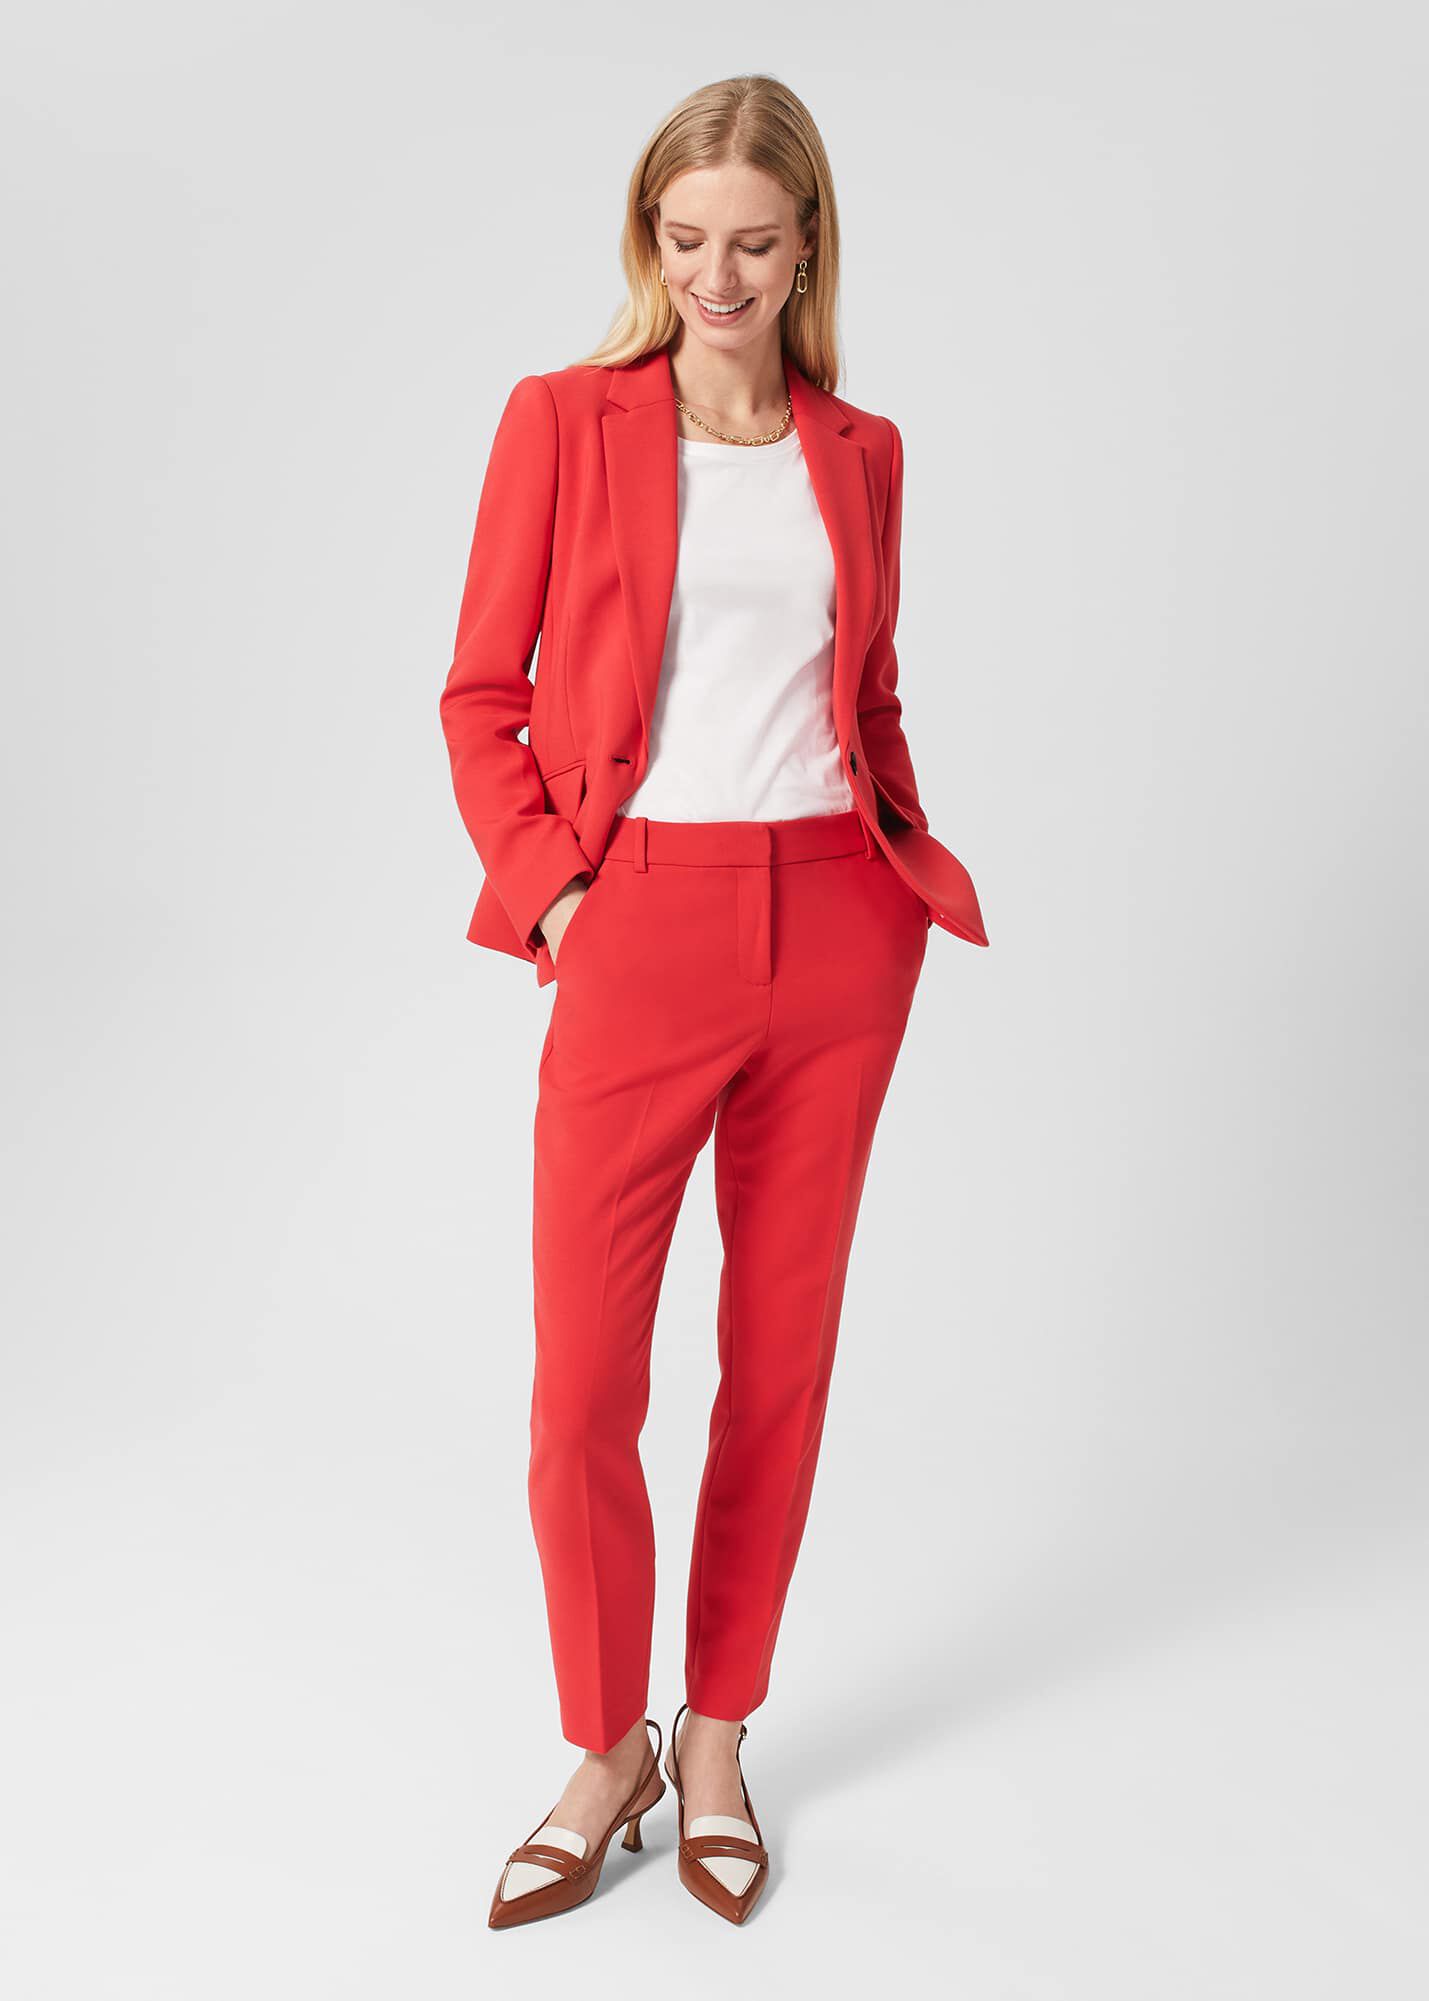 2014 Women Business Suits Formal Office Suits Work Suits With Pants Office  Uniform Style trouser suit For women